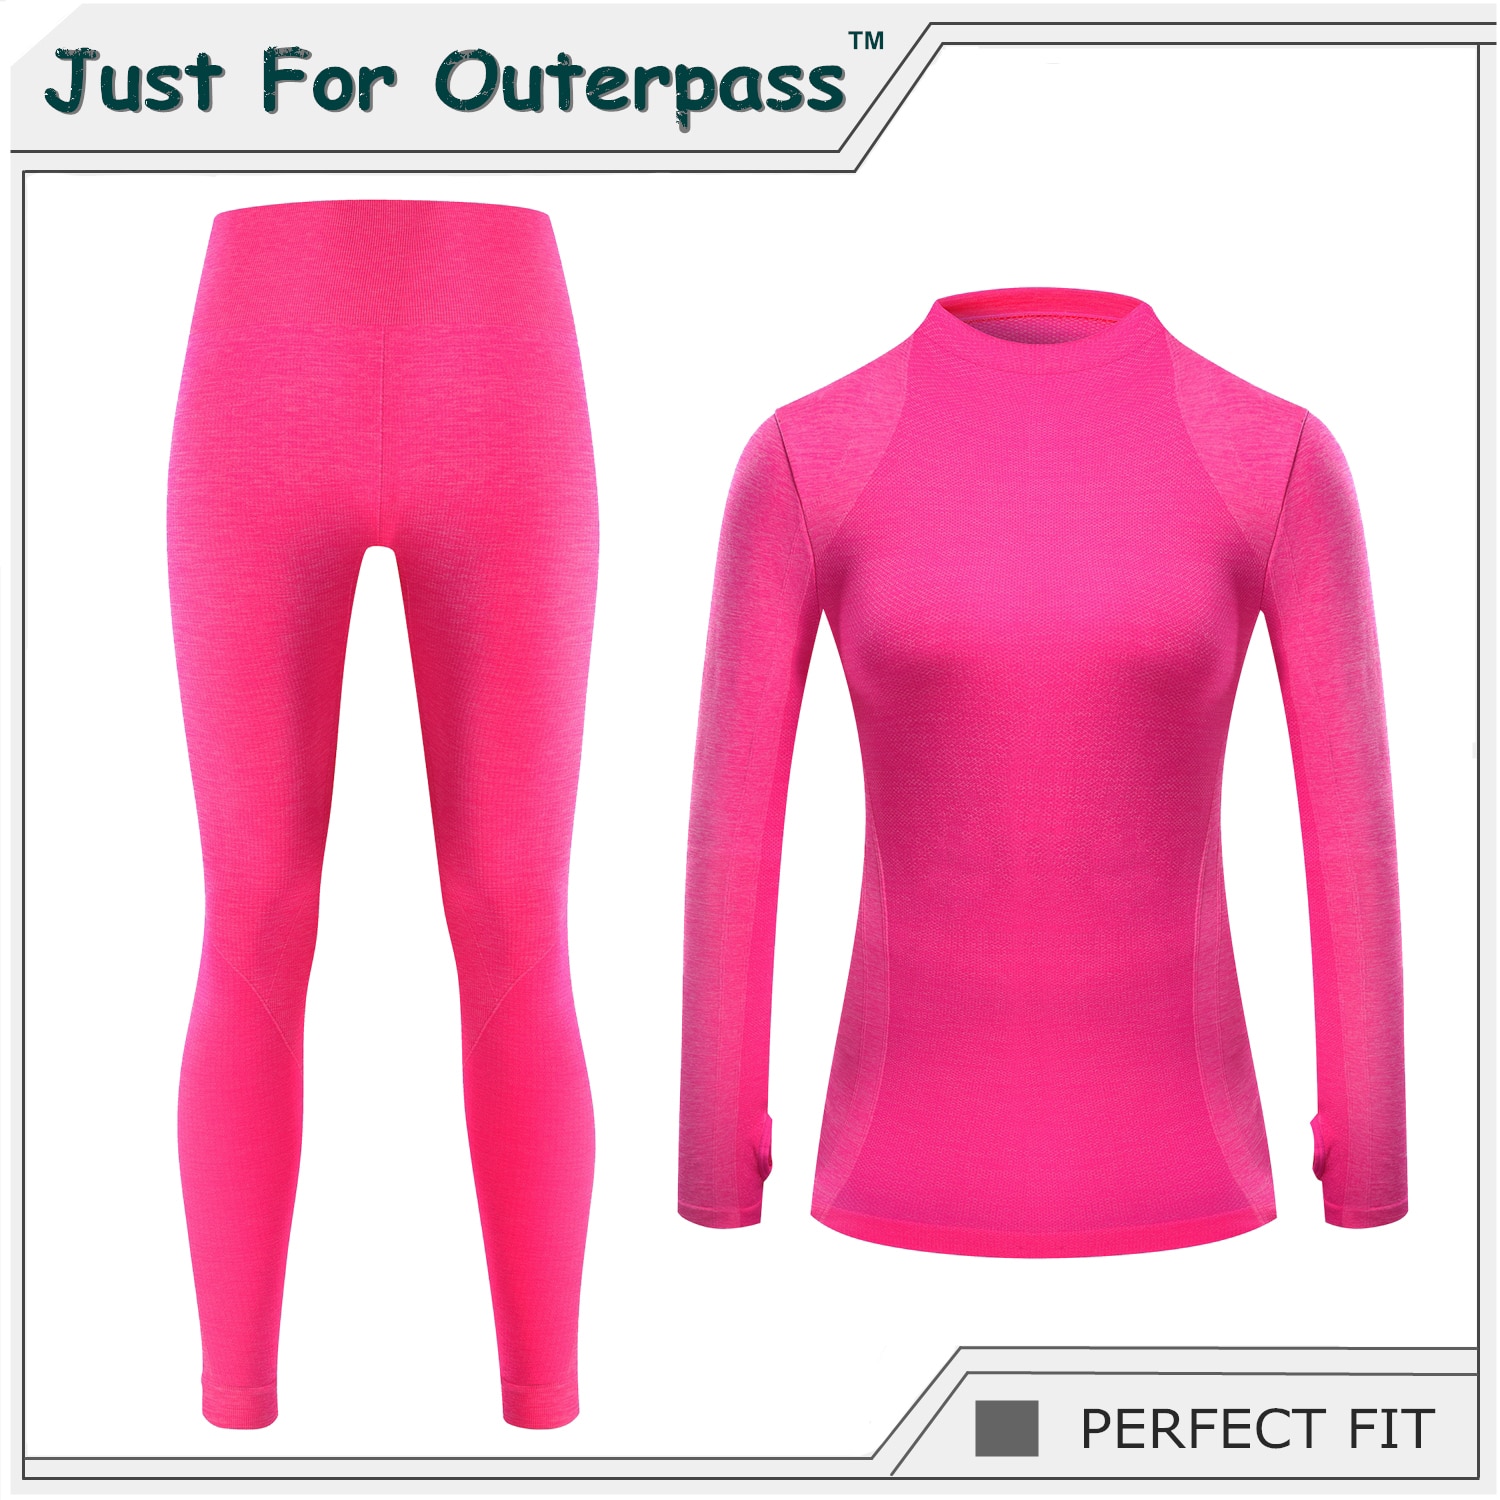 Just For Outerpass Brand Winter Thermal Underwear Women Elastic Breathable Female HI-Q Casual Warm Long Johns Set